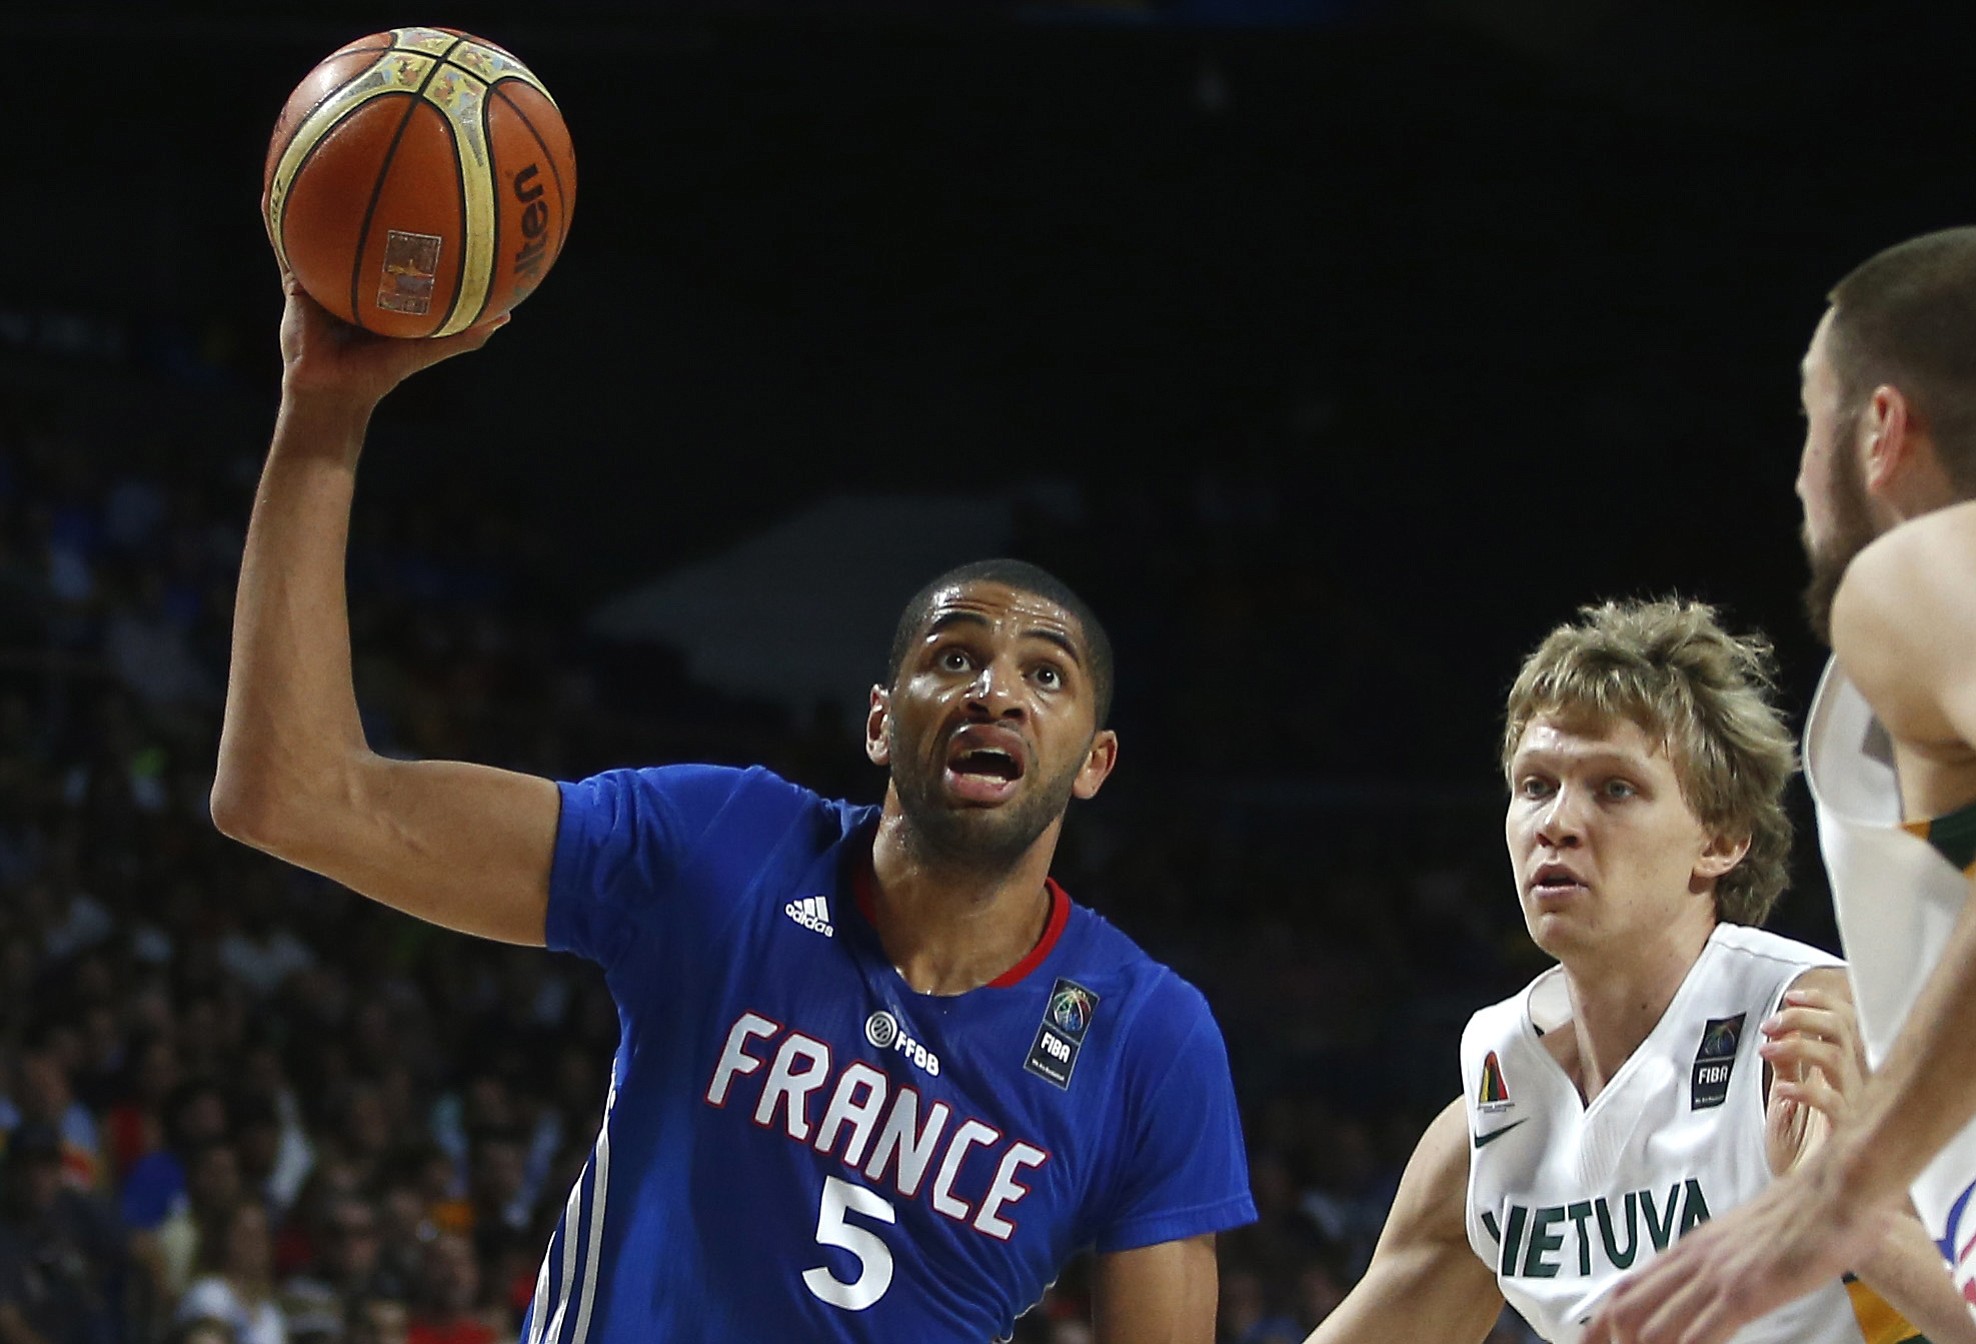 Nicolas Batum (5) said playing for France this summer, helping his team to the bronze medal at the basketball World Cup in Spain, can only make him a better leader for the Portland Trail Blazers this season.